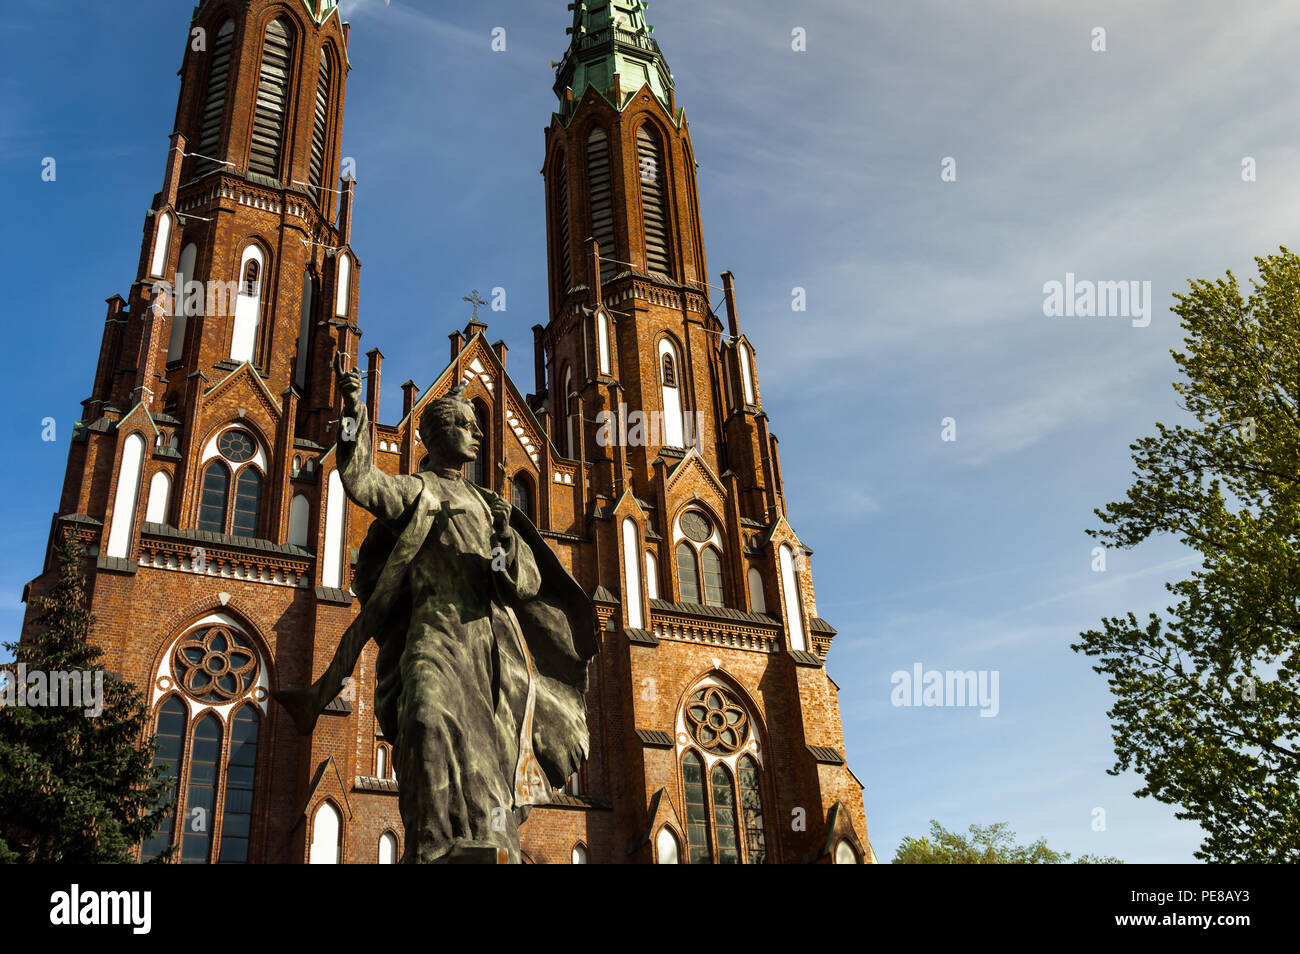 Main facade of Cathedral of St. Michael the Archangel and St. Florian the Martyr in warsaw. Views of the sculpture of the entrance during a clear day. Stock Photo